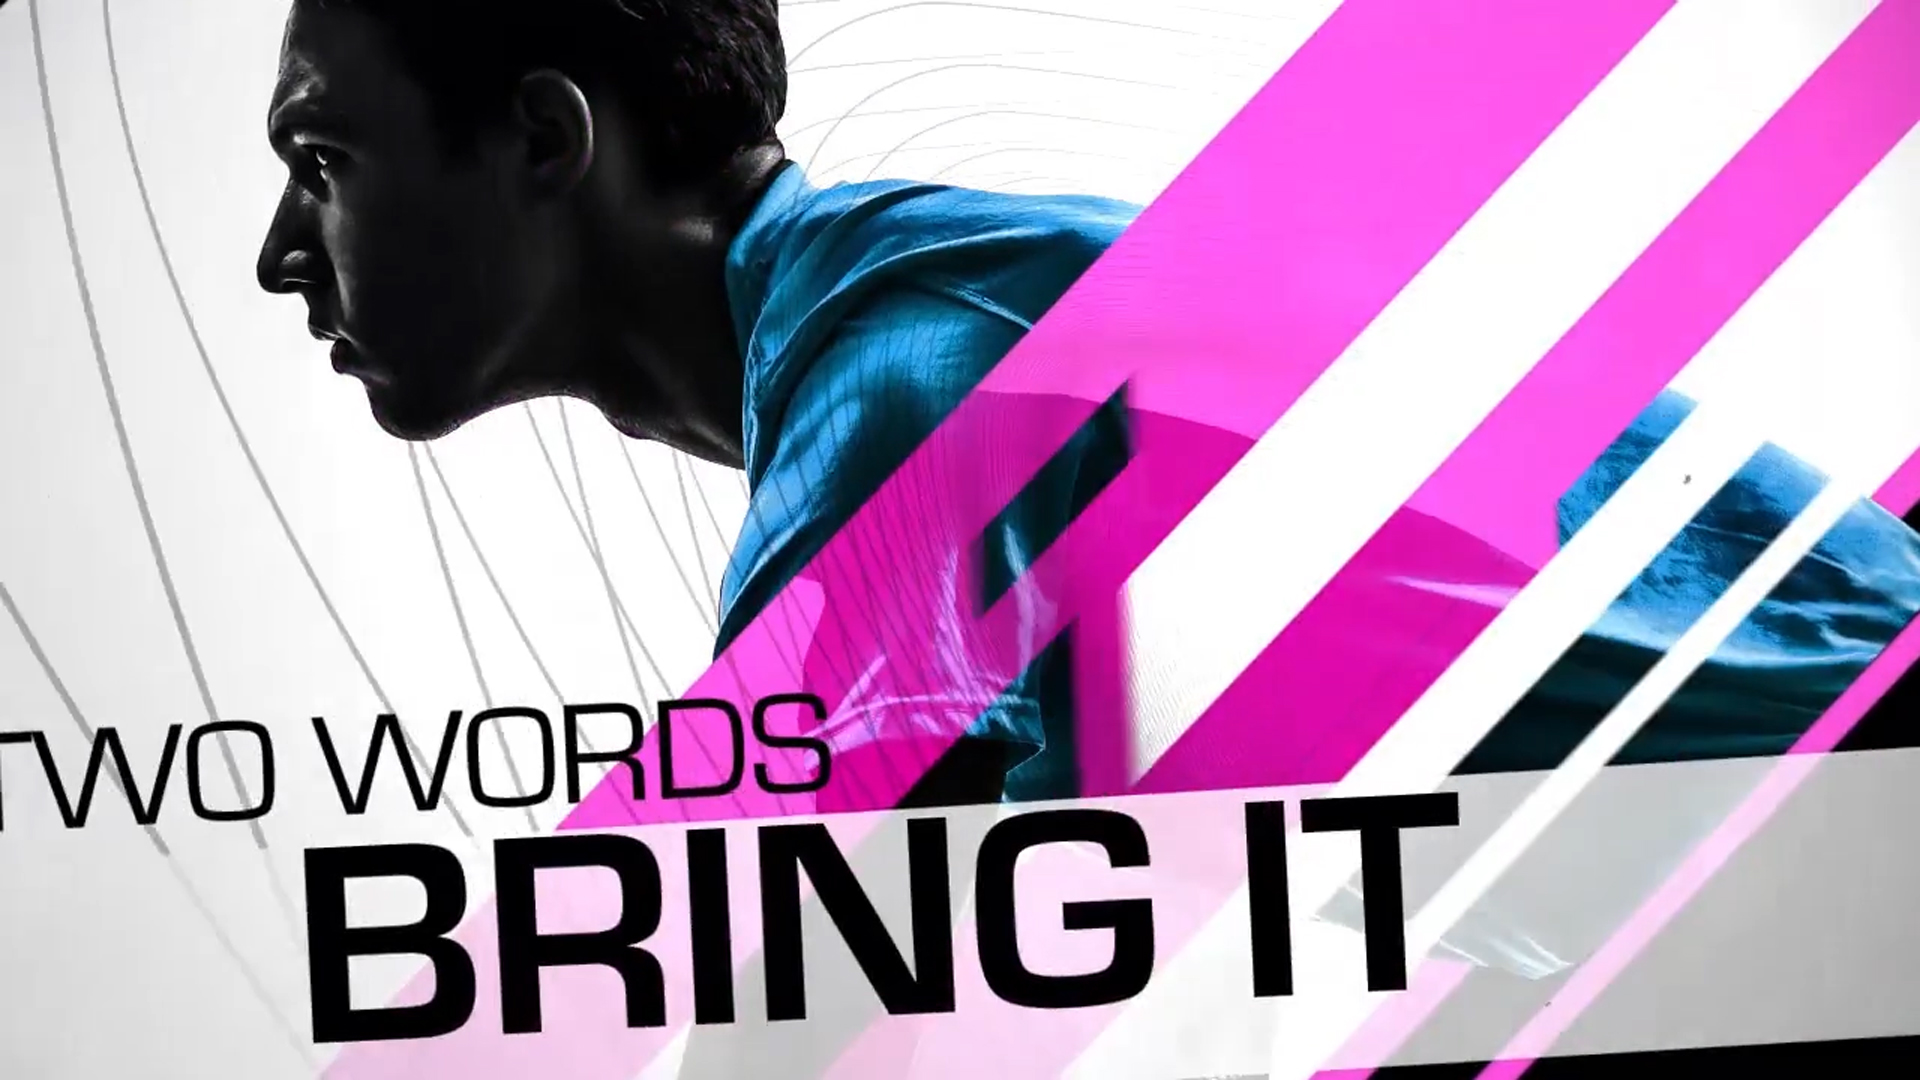 An image from a sales kickoff event opener for EMC. It depicts an athlete with the text "two words... bring it" over top.